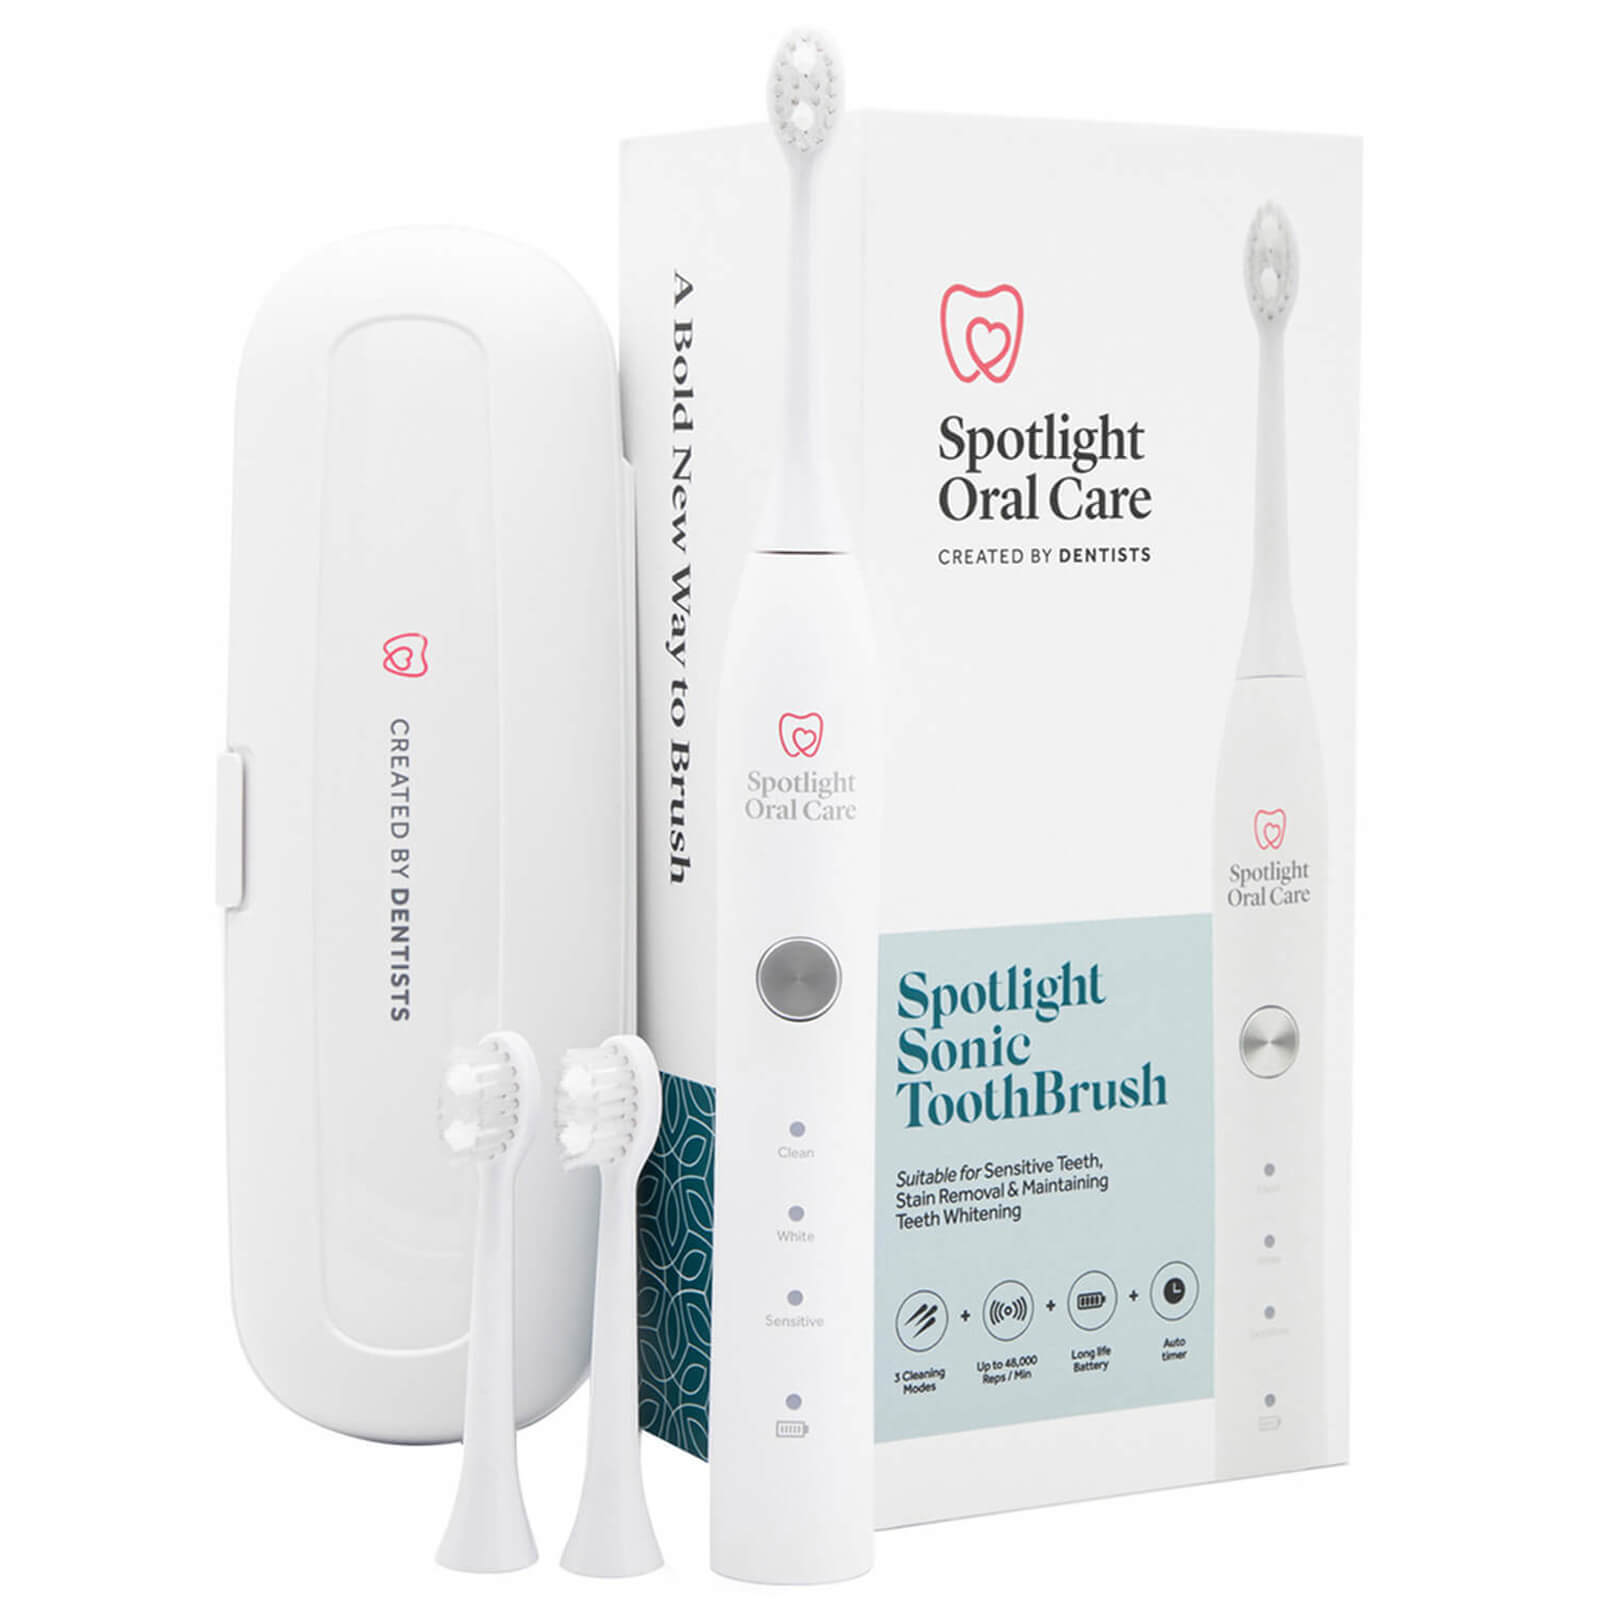 Image of Spotlight Oral Care Sonic Toothbrush